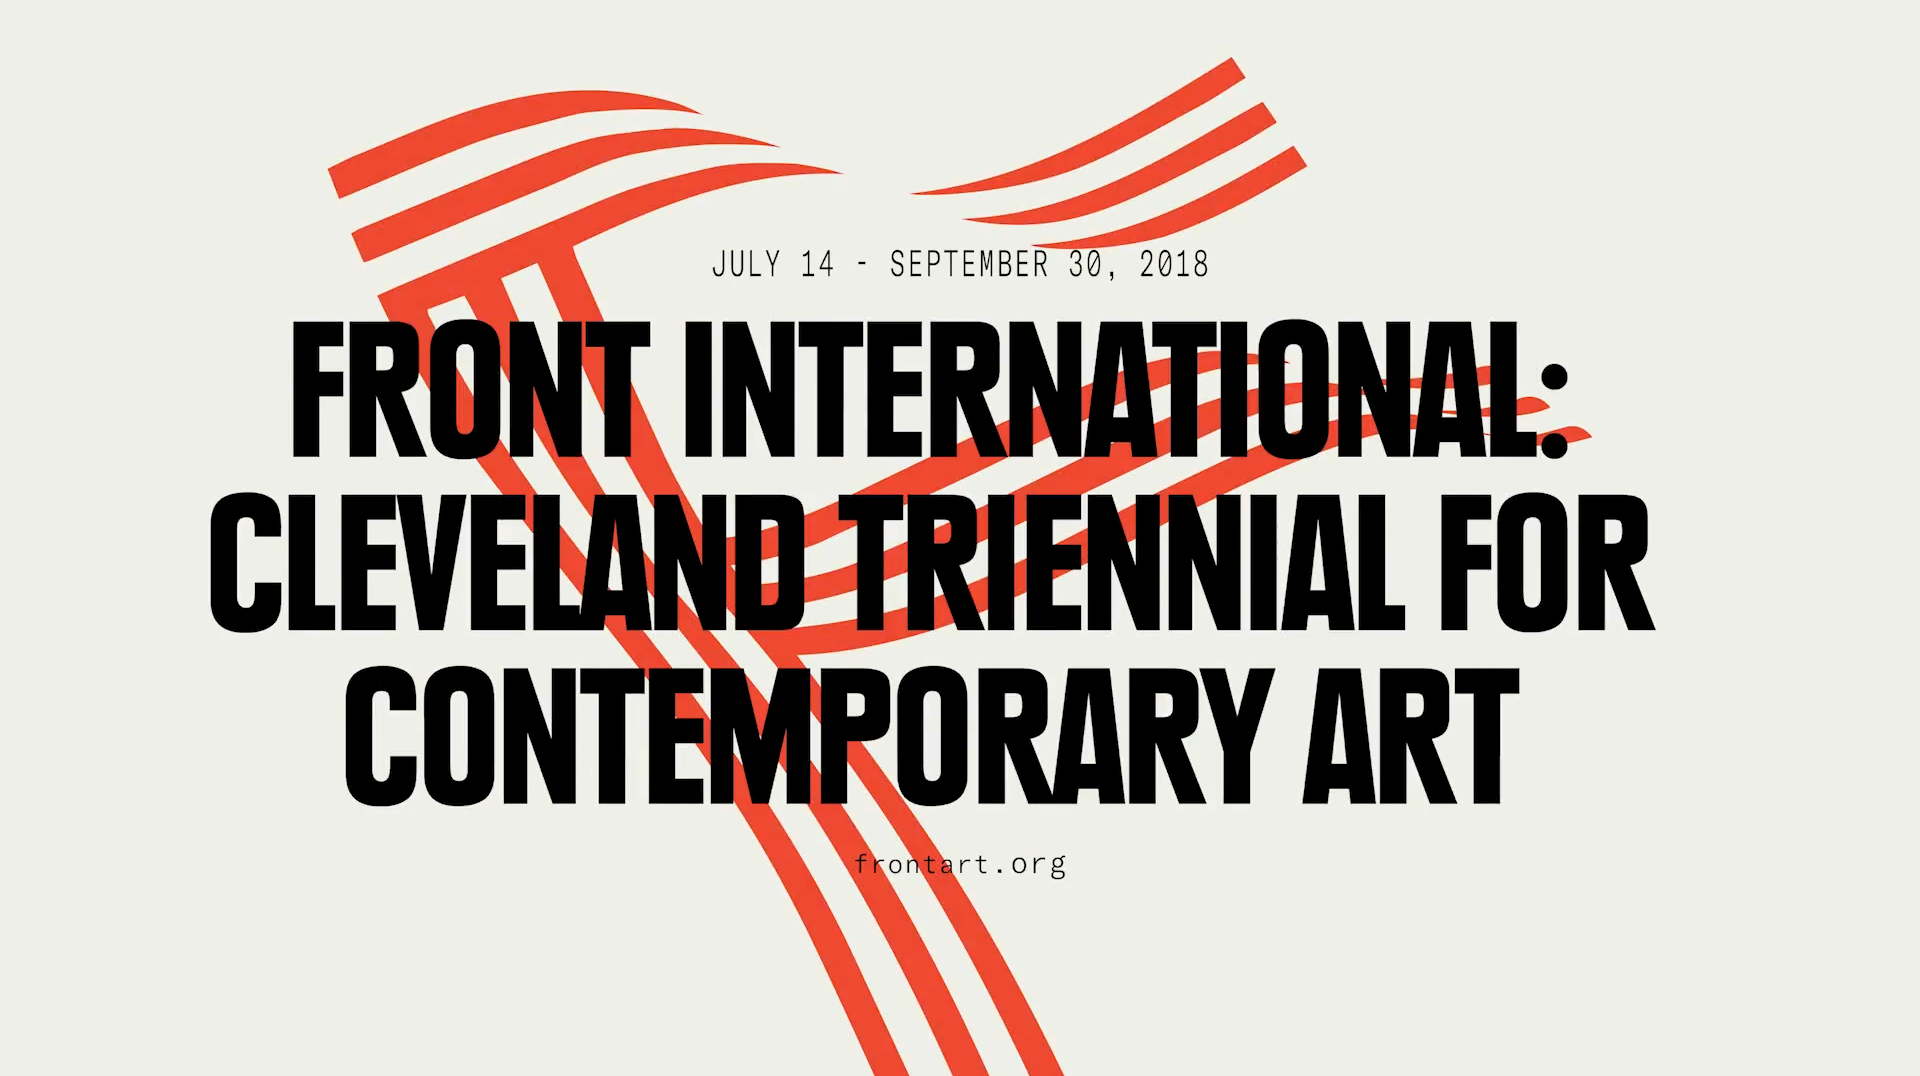 Hao Jingban participates in “FRONT International: Cleveland Triennial for Contemporary Art” in Cleveland, Ohio.